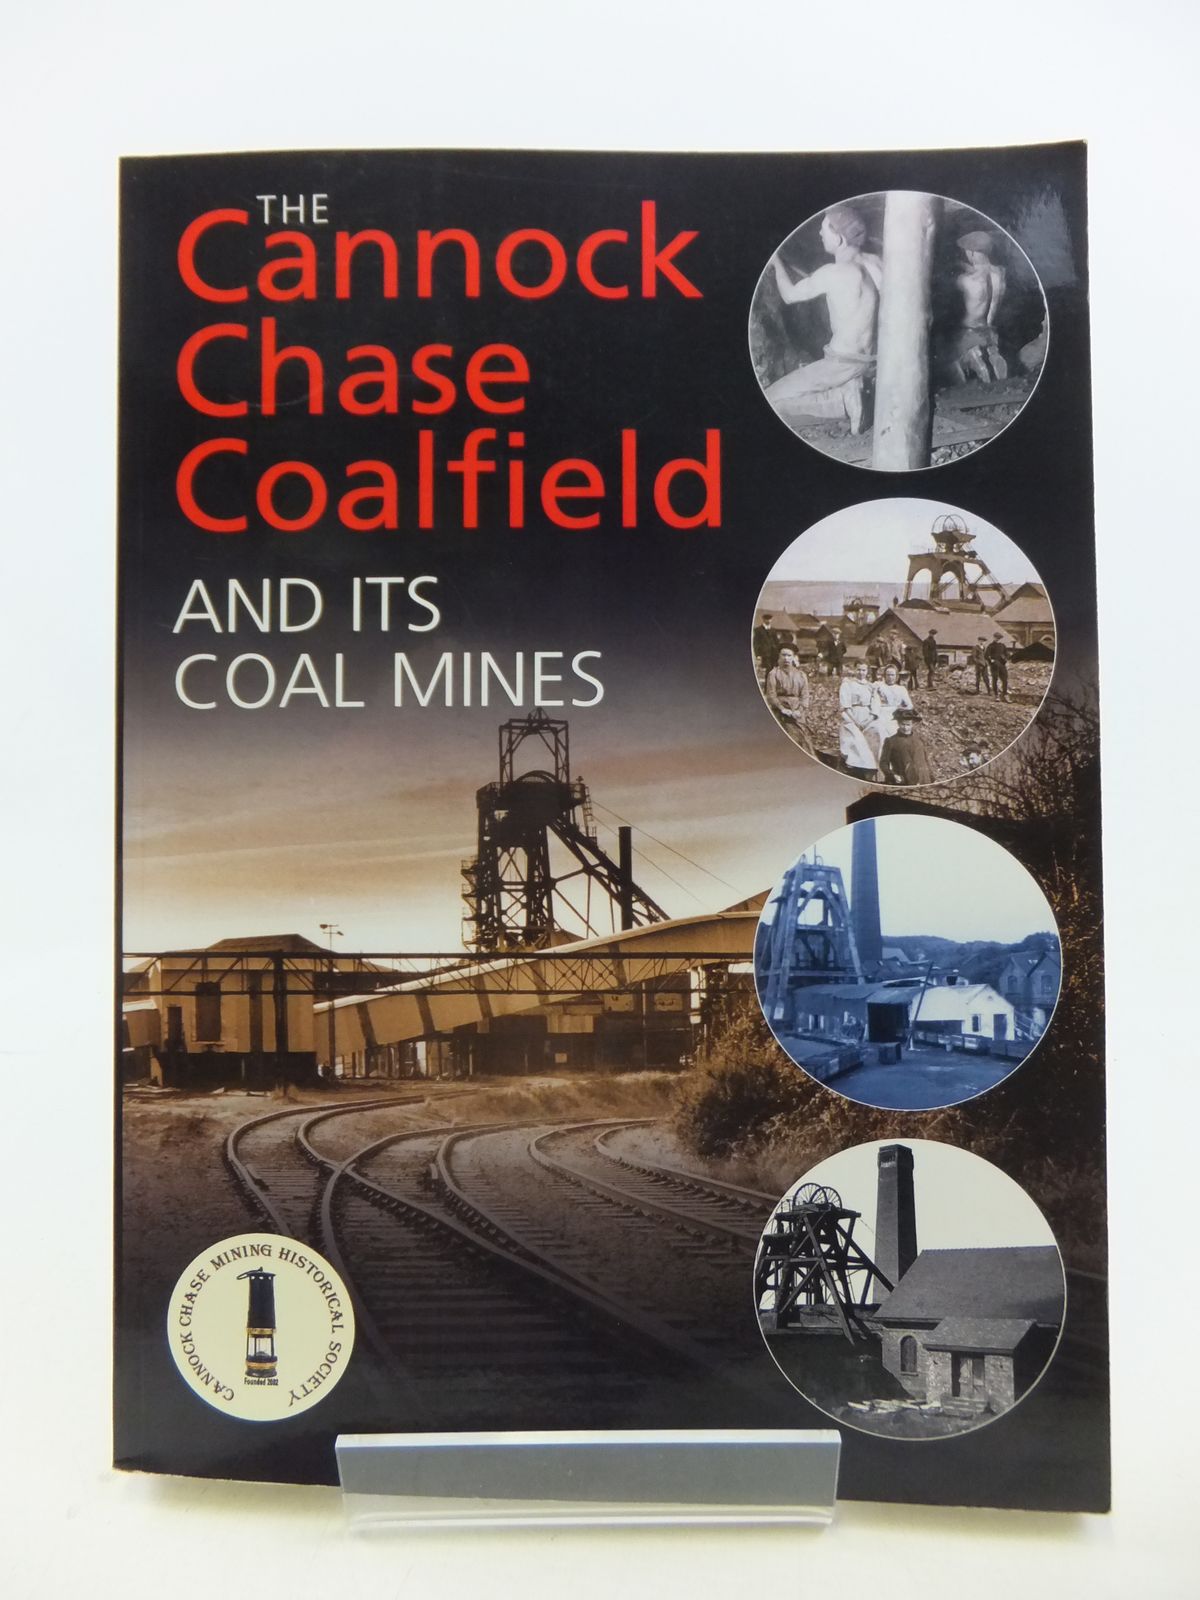 Stella & Rose's Books : THE CANNOCK CHASE COALFIELD AND ITS COAL